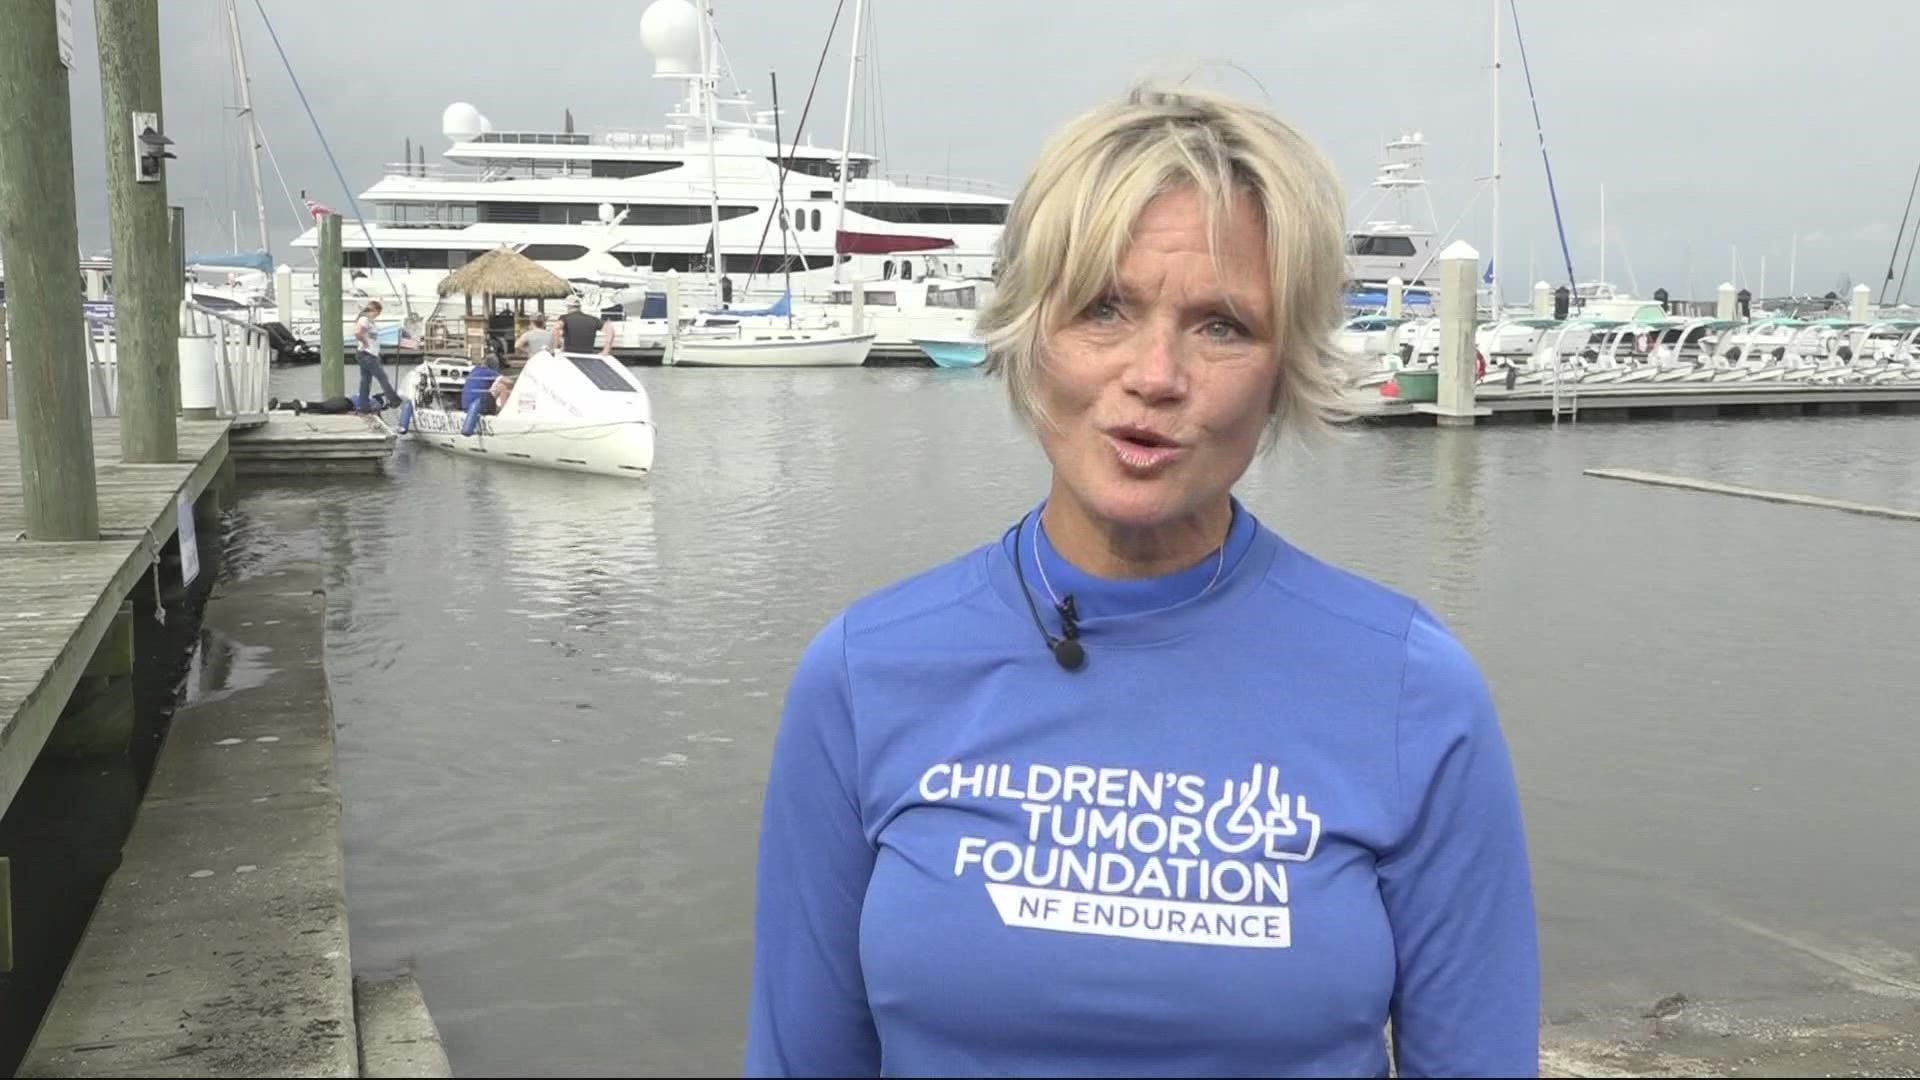 Michele Holbrook of Fernandina Beach plans to row 360 miles from Miami to Fernandina Beach to raise money for kids with tumors.